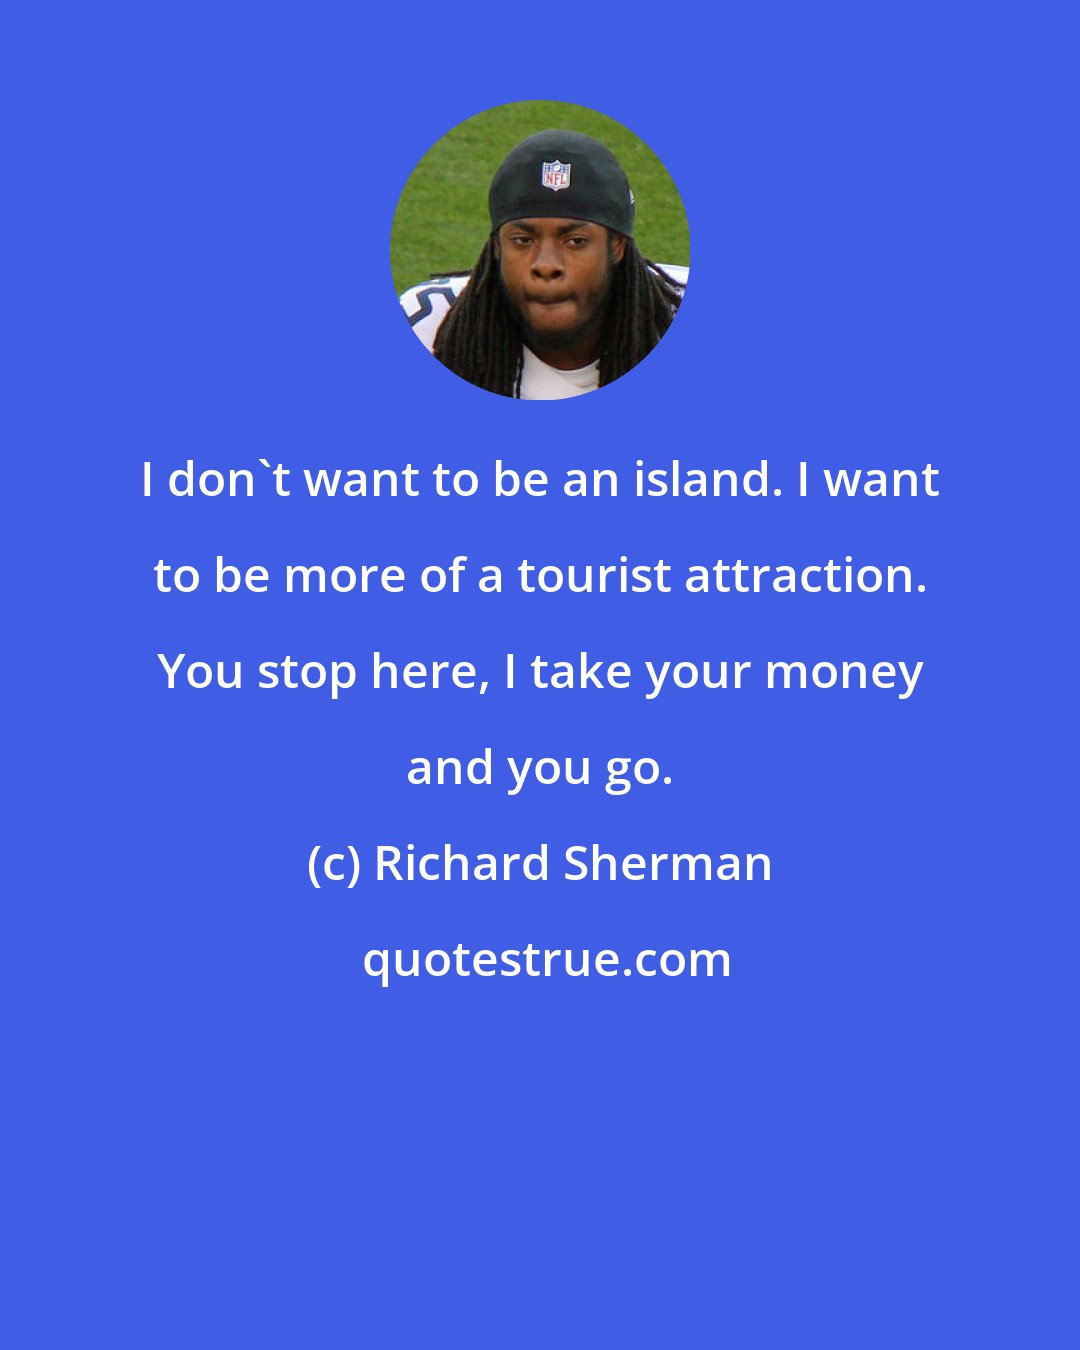 Richard Sherman: I don't want to be an island. I want to be more of a tourist attraction. You stop here, I take your money and you go.